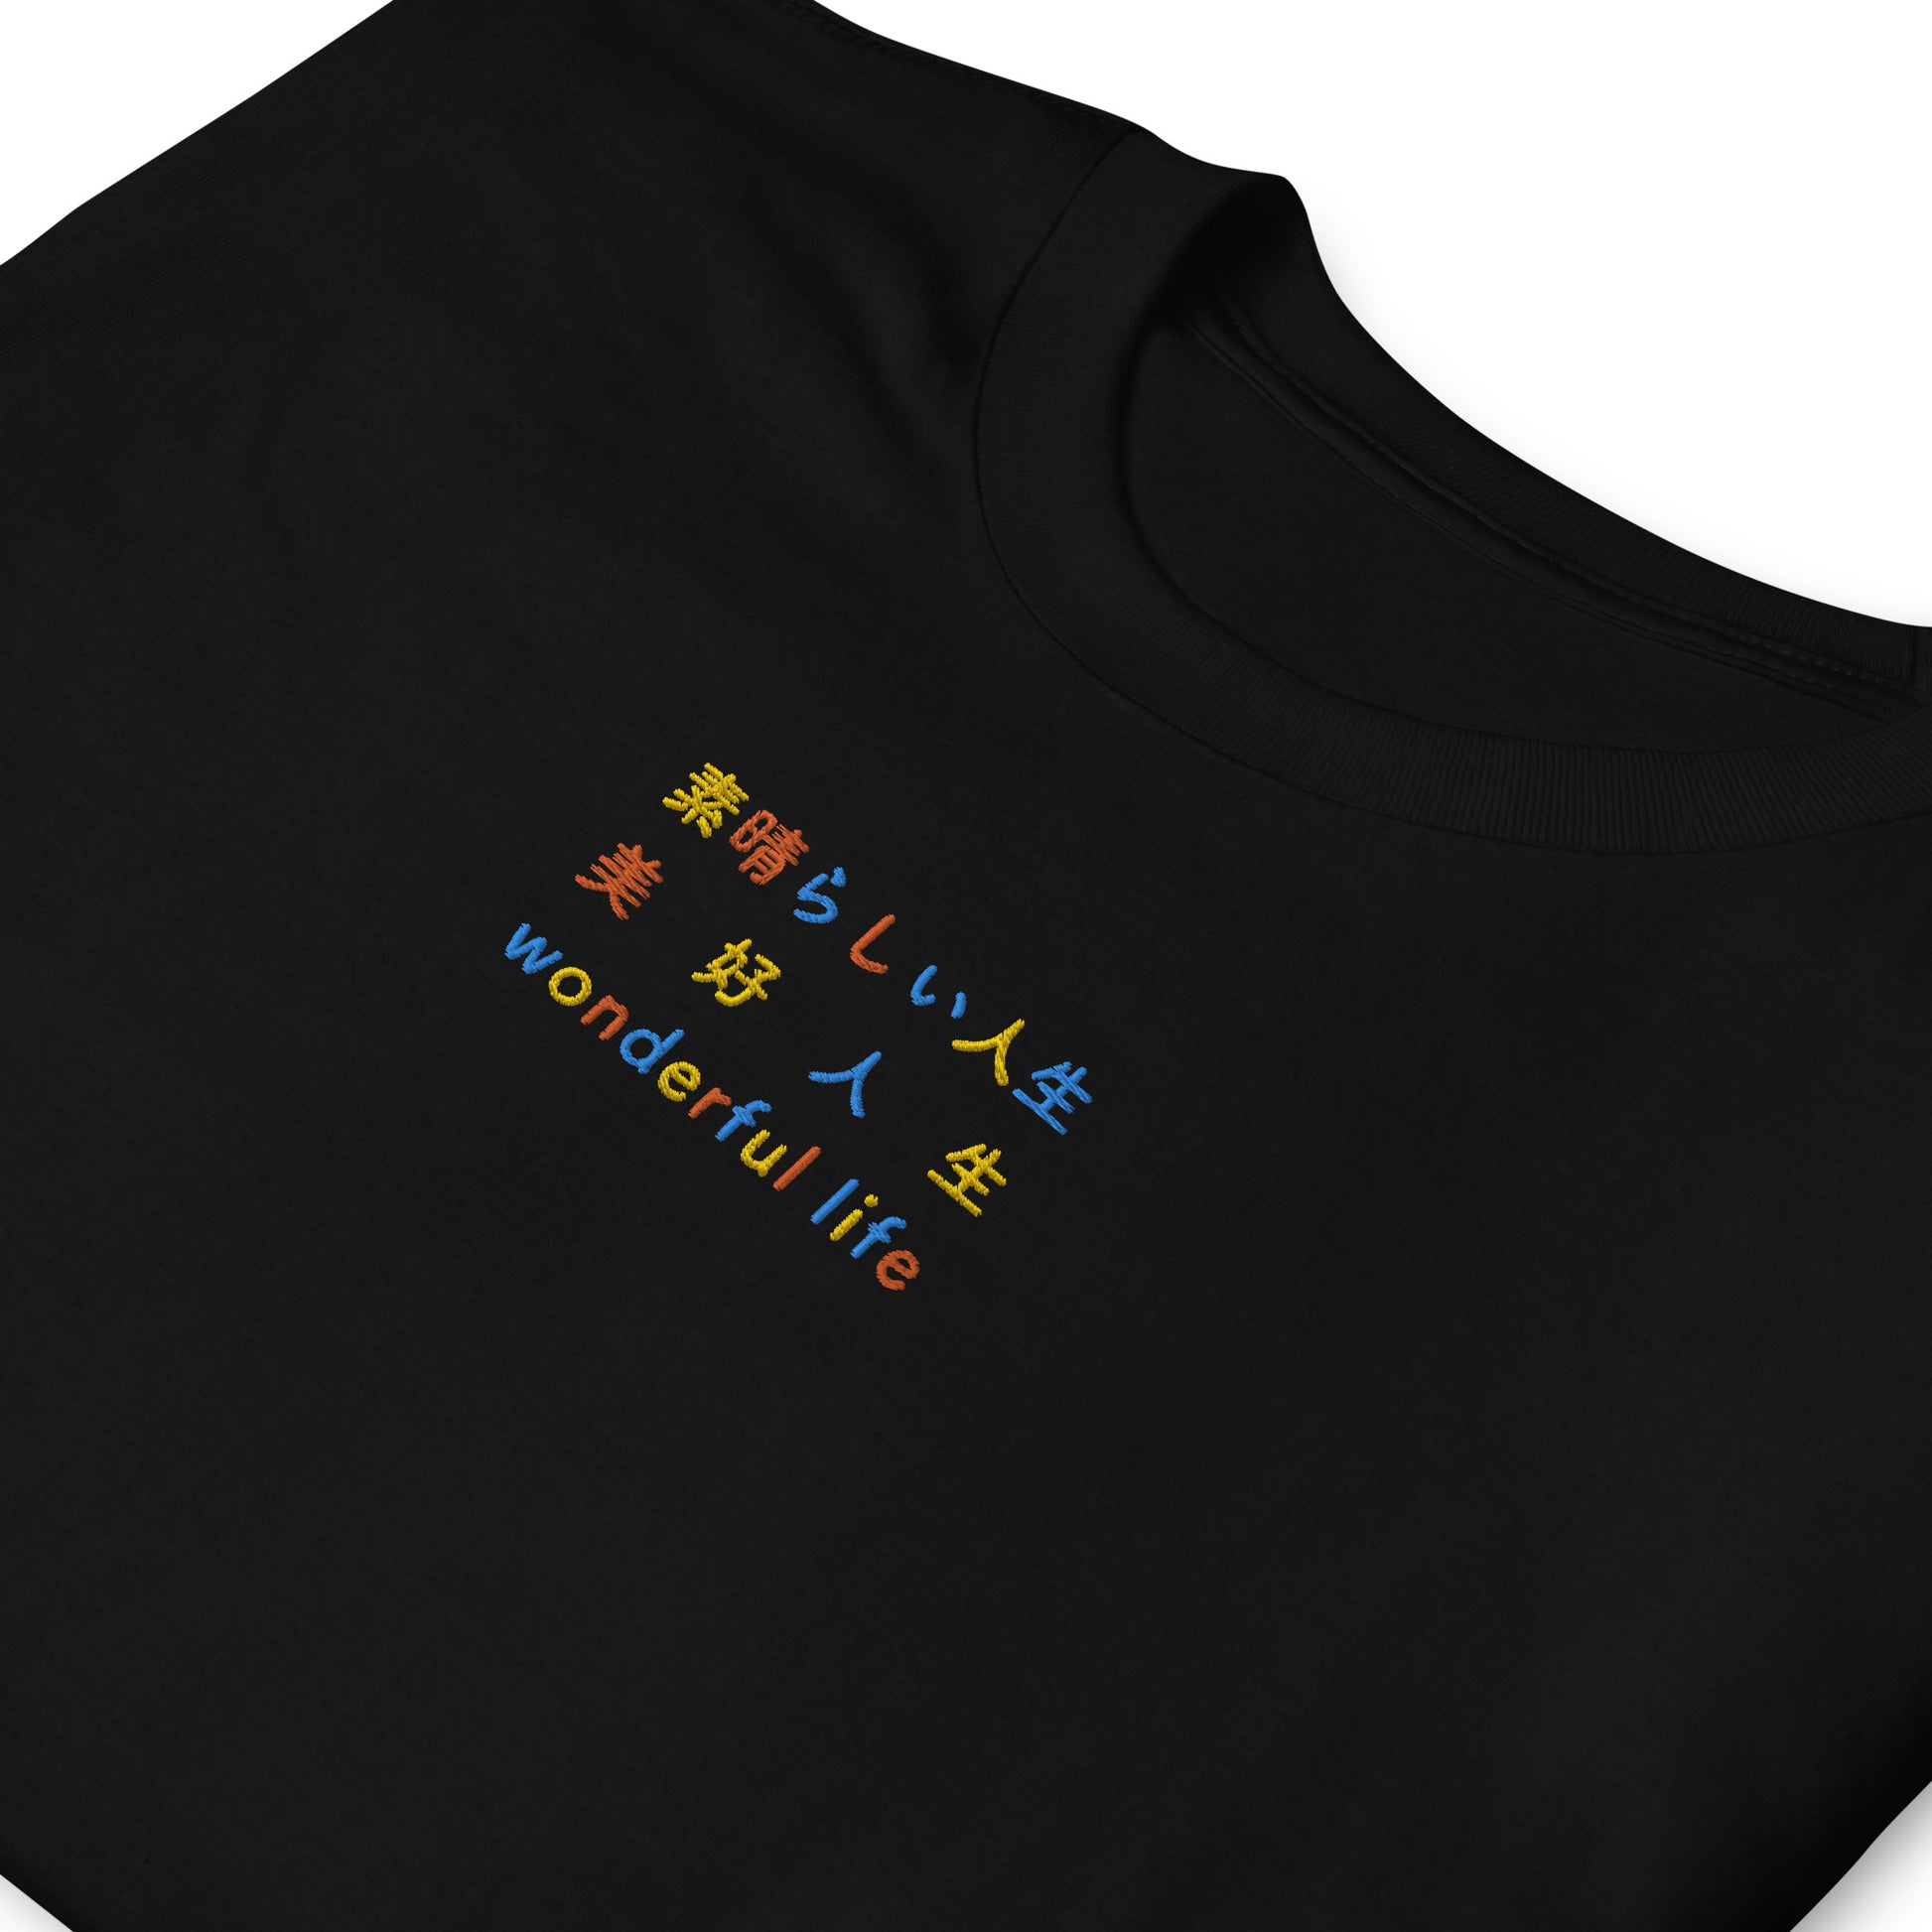 Black High Quality Tee - Front Design with Yellow, Orange and Blue Embroidery "Wonderful Life" in Japanese,Chinese and English